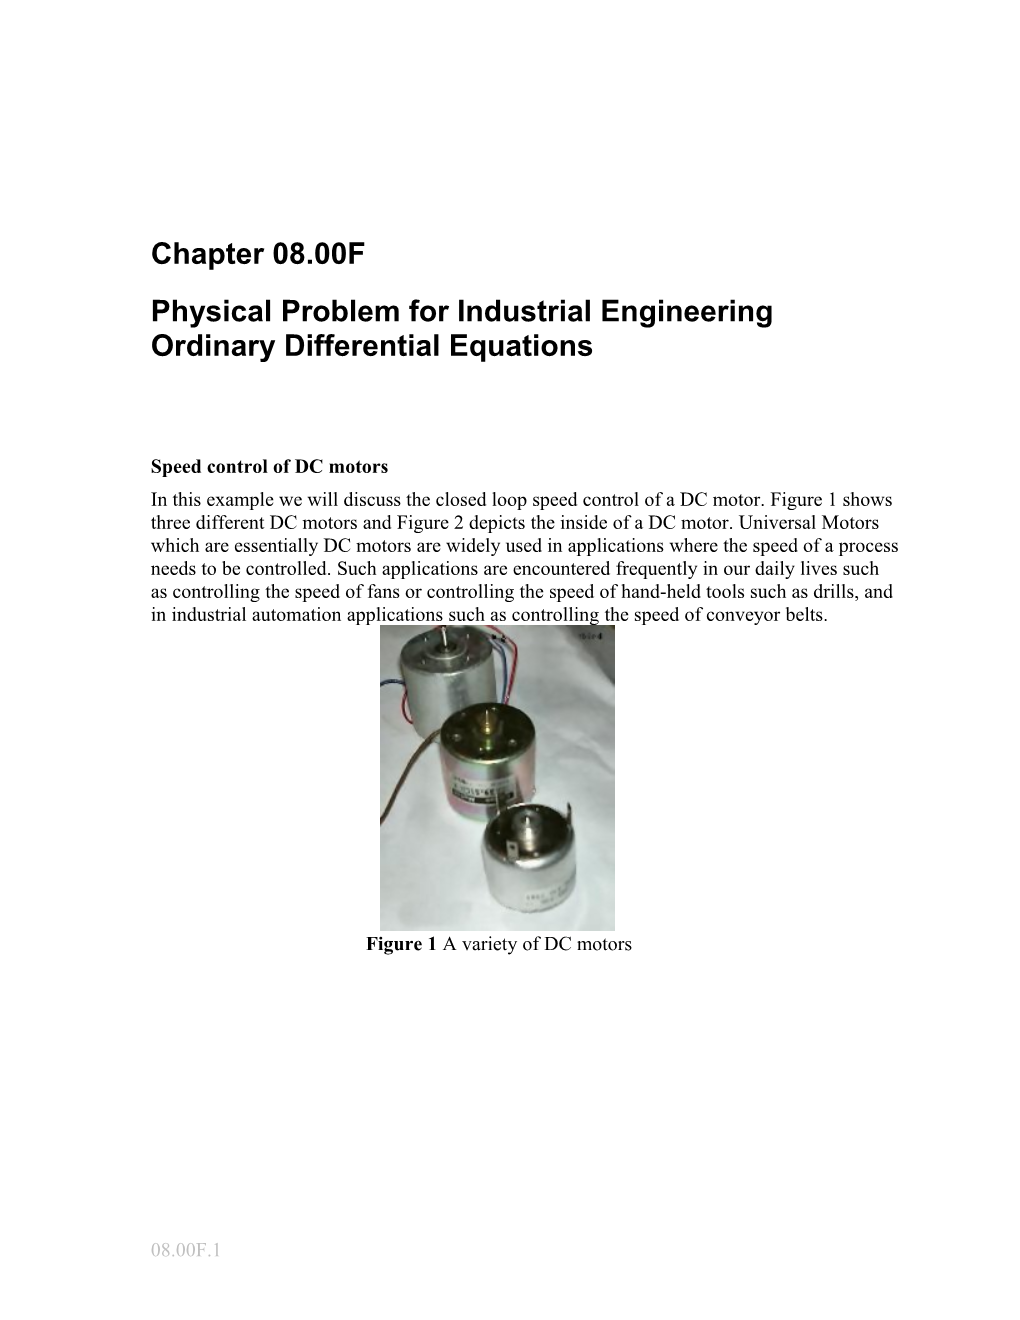 Ordinary Differential Equations-Physical Problem-Industrial Engineering